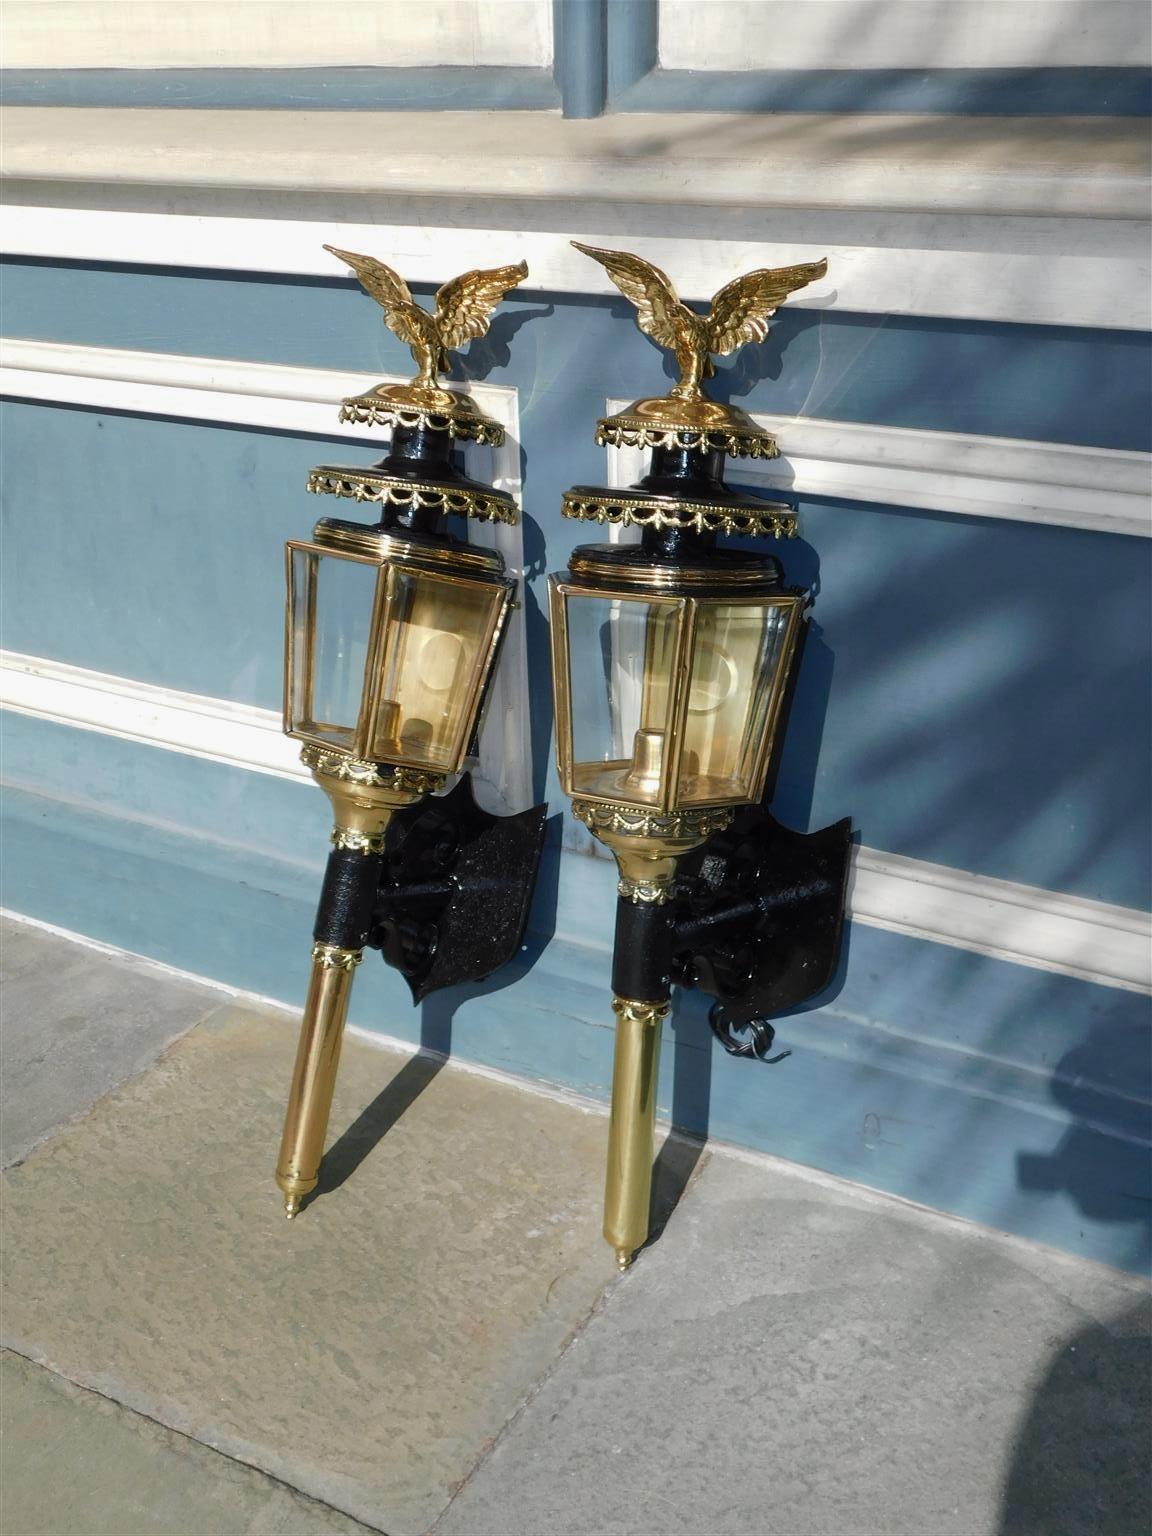 Beveled Pair of American Brass and Iron Eagle Finial Beaded Swag Coach Lanterns, C. 1850